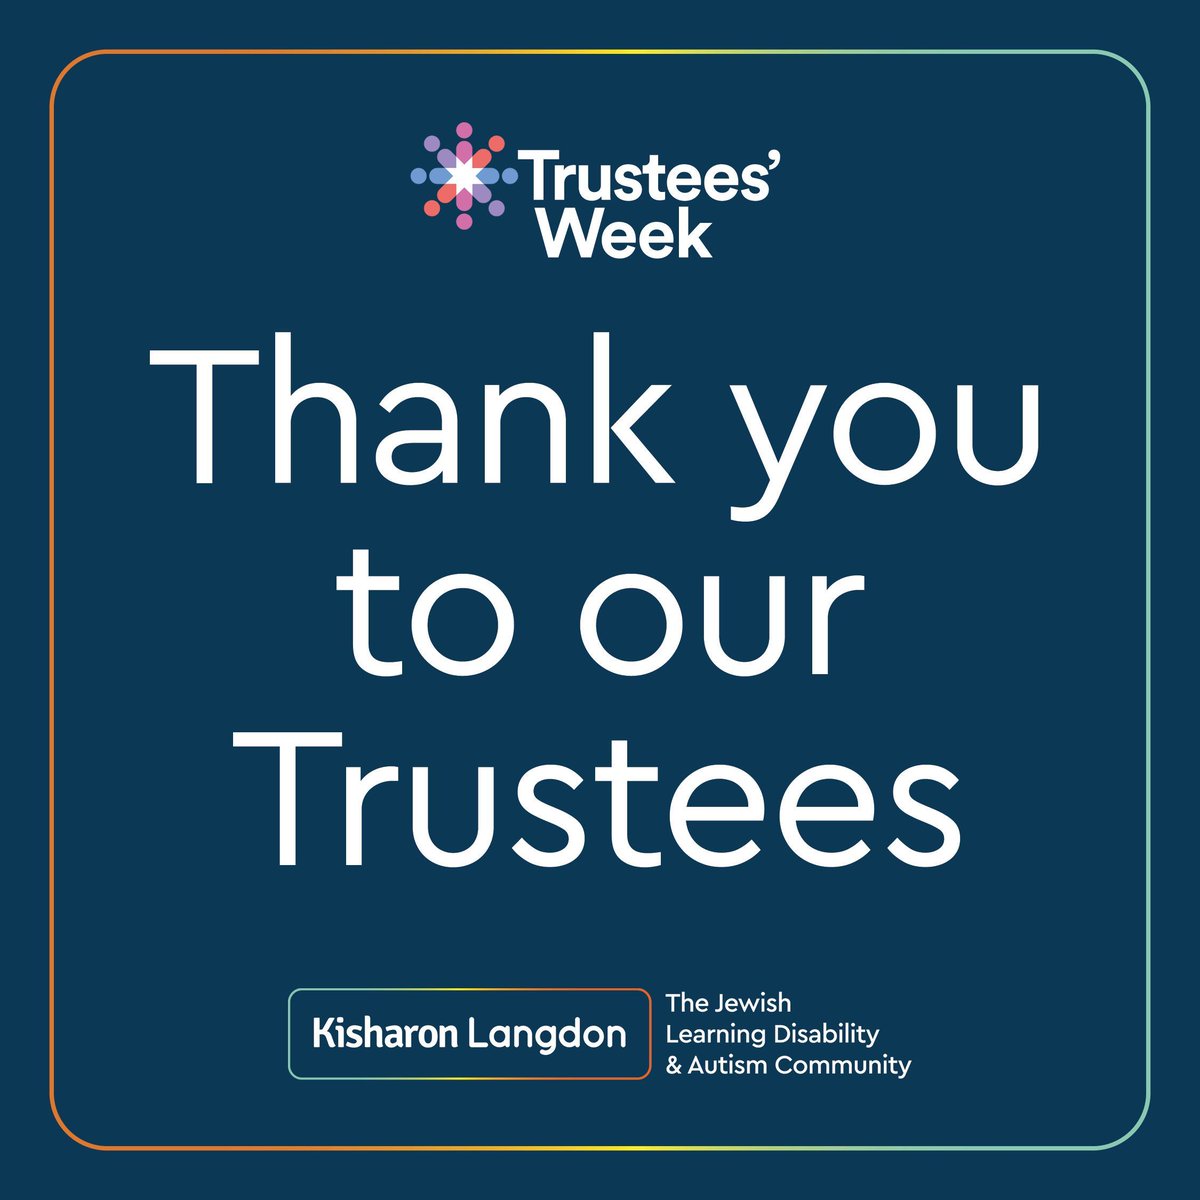 This Trustees' Week, we celebrate the achievements of our amazing Kisharon Langdon Trustees and thank them for all their support, time, commitment and dedication. #TrusteesWeek23 #TrusteesWeek2023